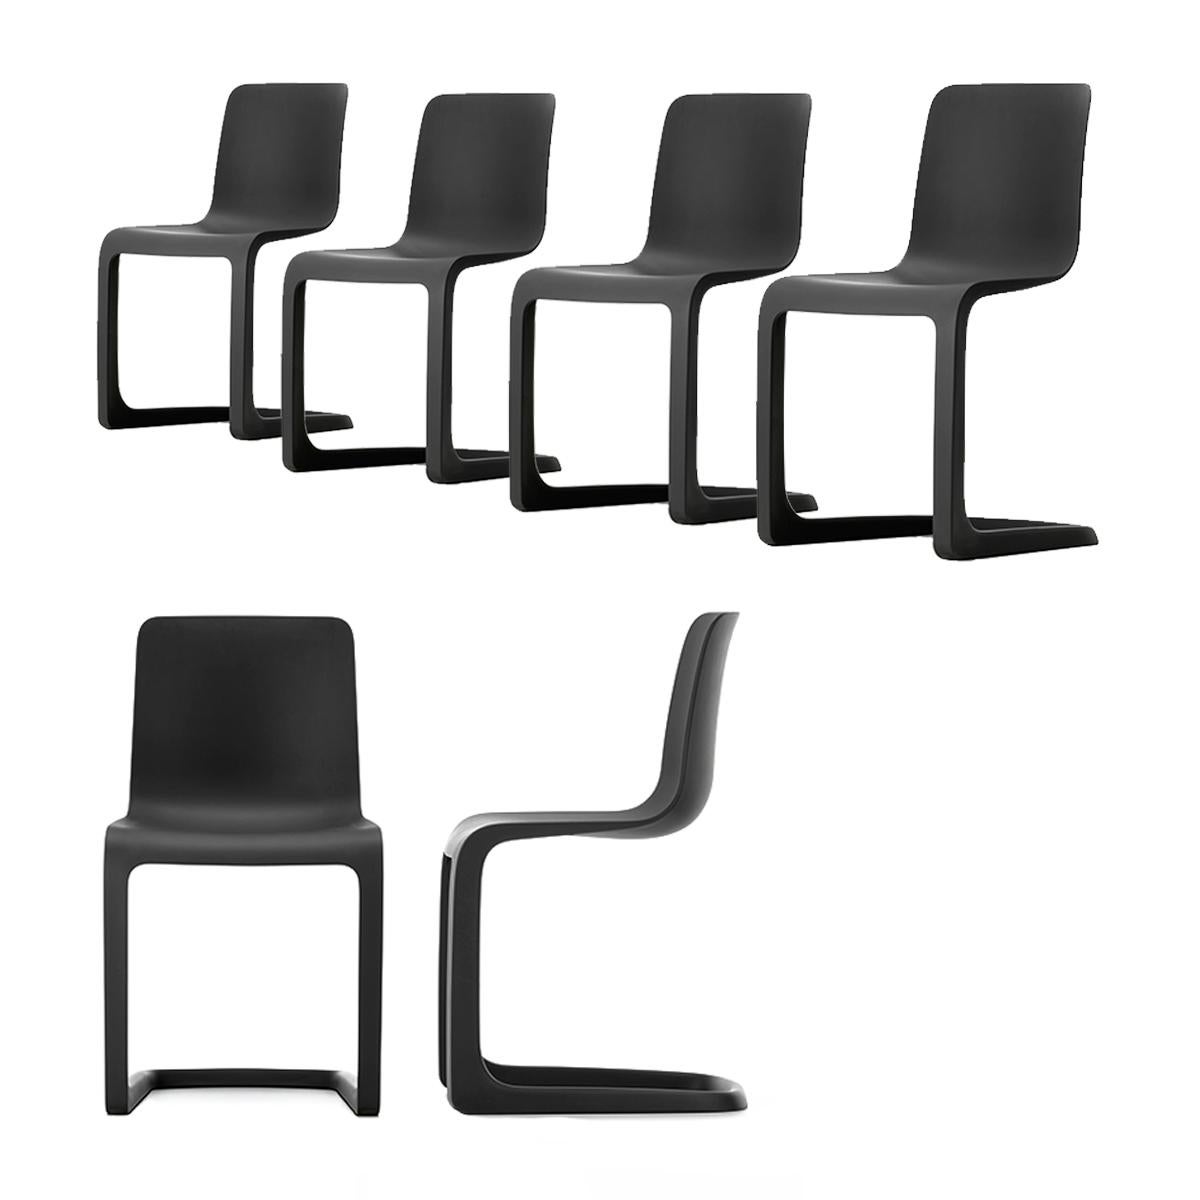 Chair designed by Jasper Morrison in 2020.
Manufactured by Vitra, Switzerland.

EVO-C is a successful, uncompromising iteration of the principle and characteristics of the classic cantilever chair in the material of plastic. Thanks to today's gas